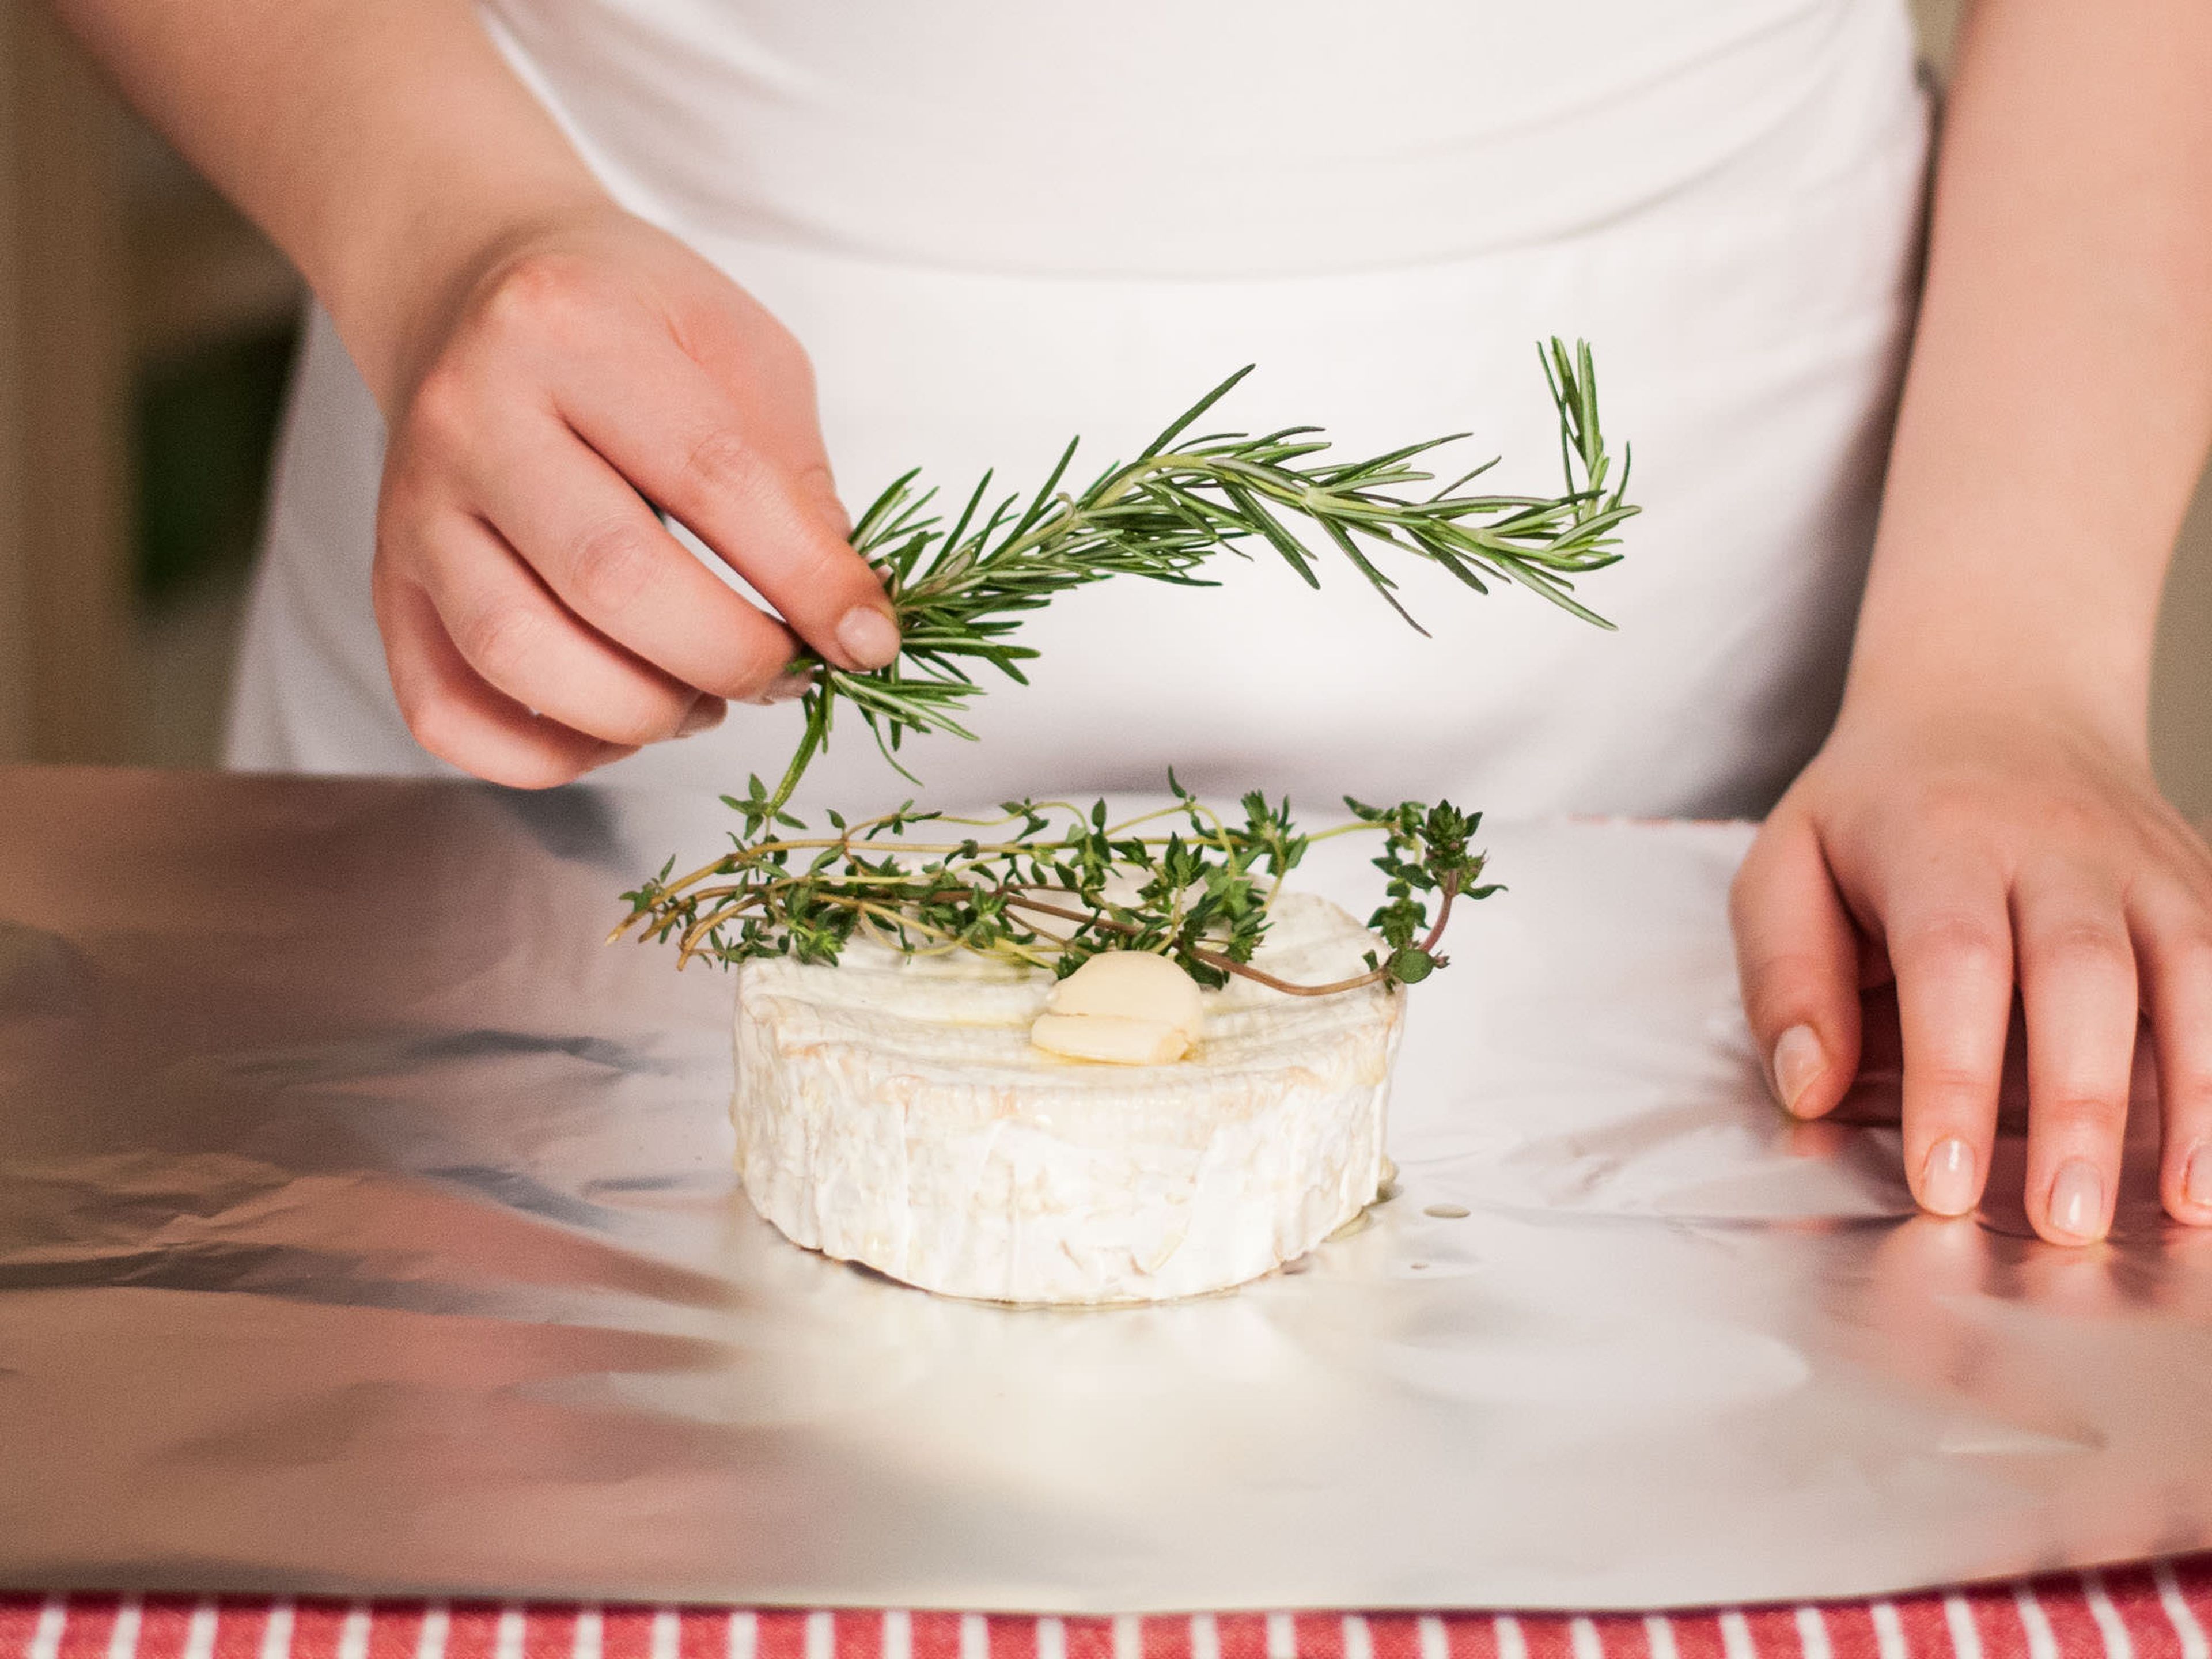 Preheat the grill. Place camembert on a square of aluminum foil and brush it with some olive oil. Top with sprigs of rosemary, thyme and crushed garlic clove.